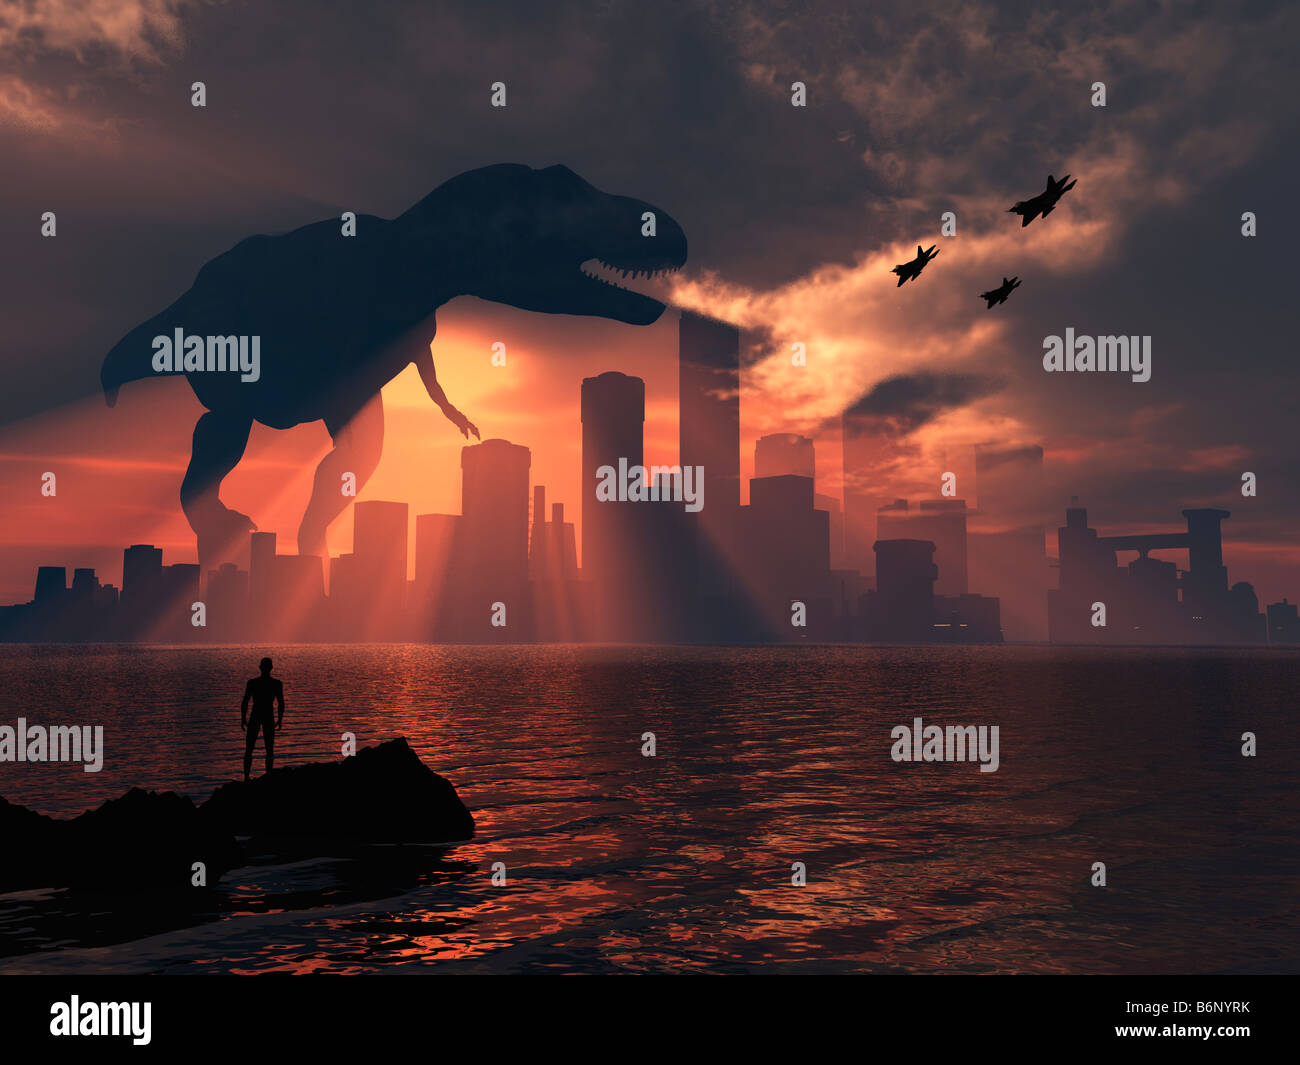 A Gigantic T Rex Dinosaur Attacking A Modern Day City Stock Photo